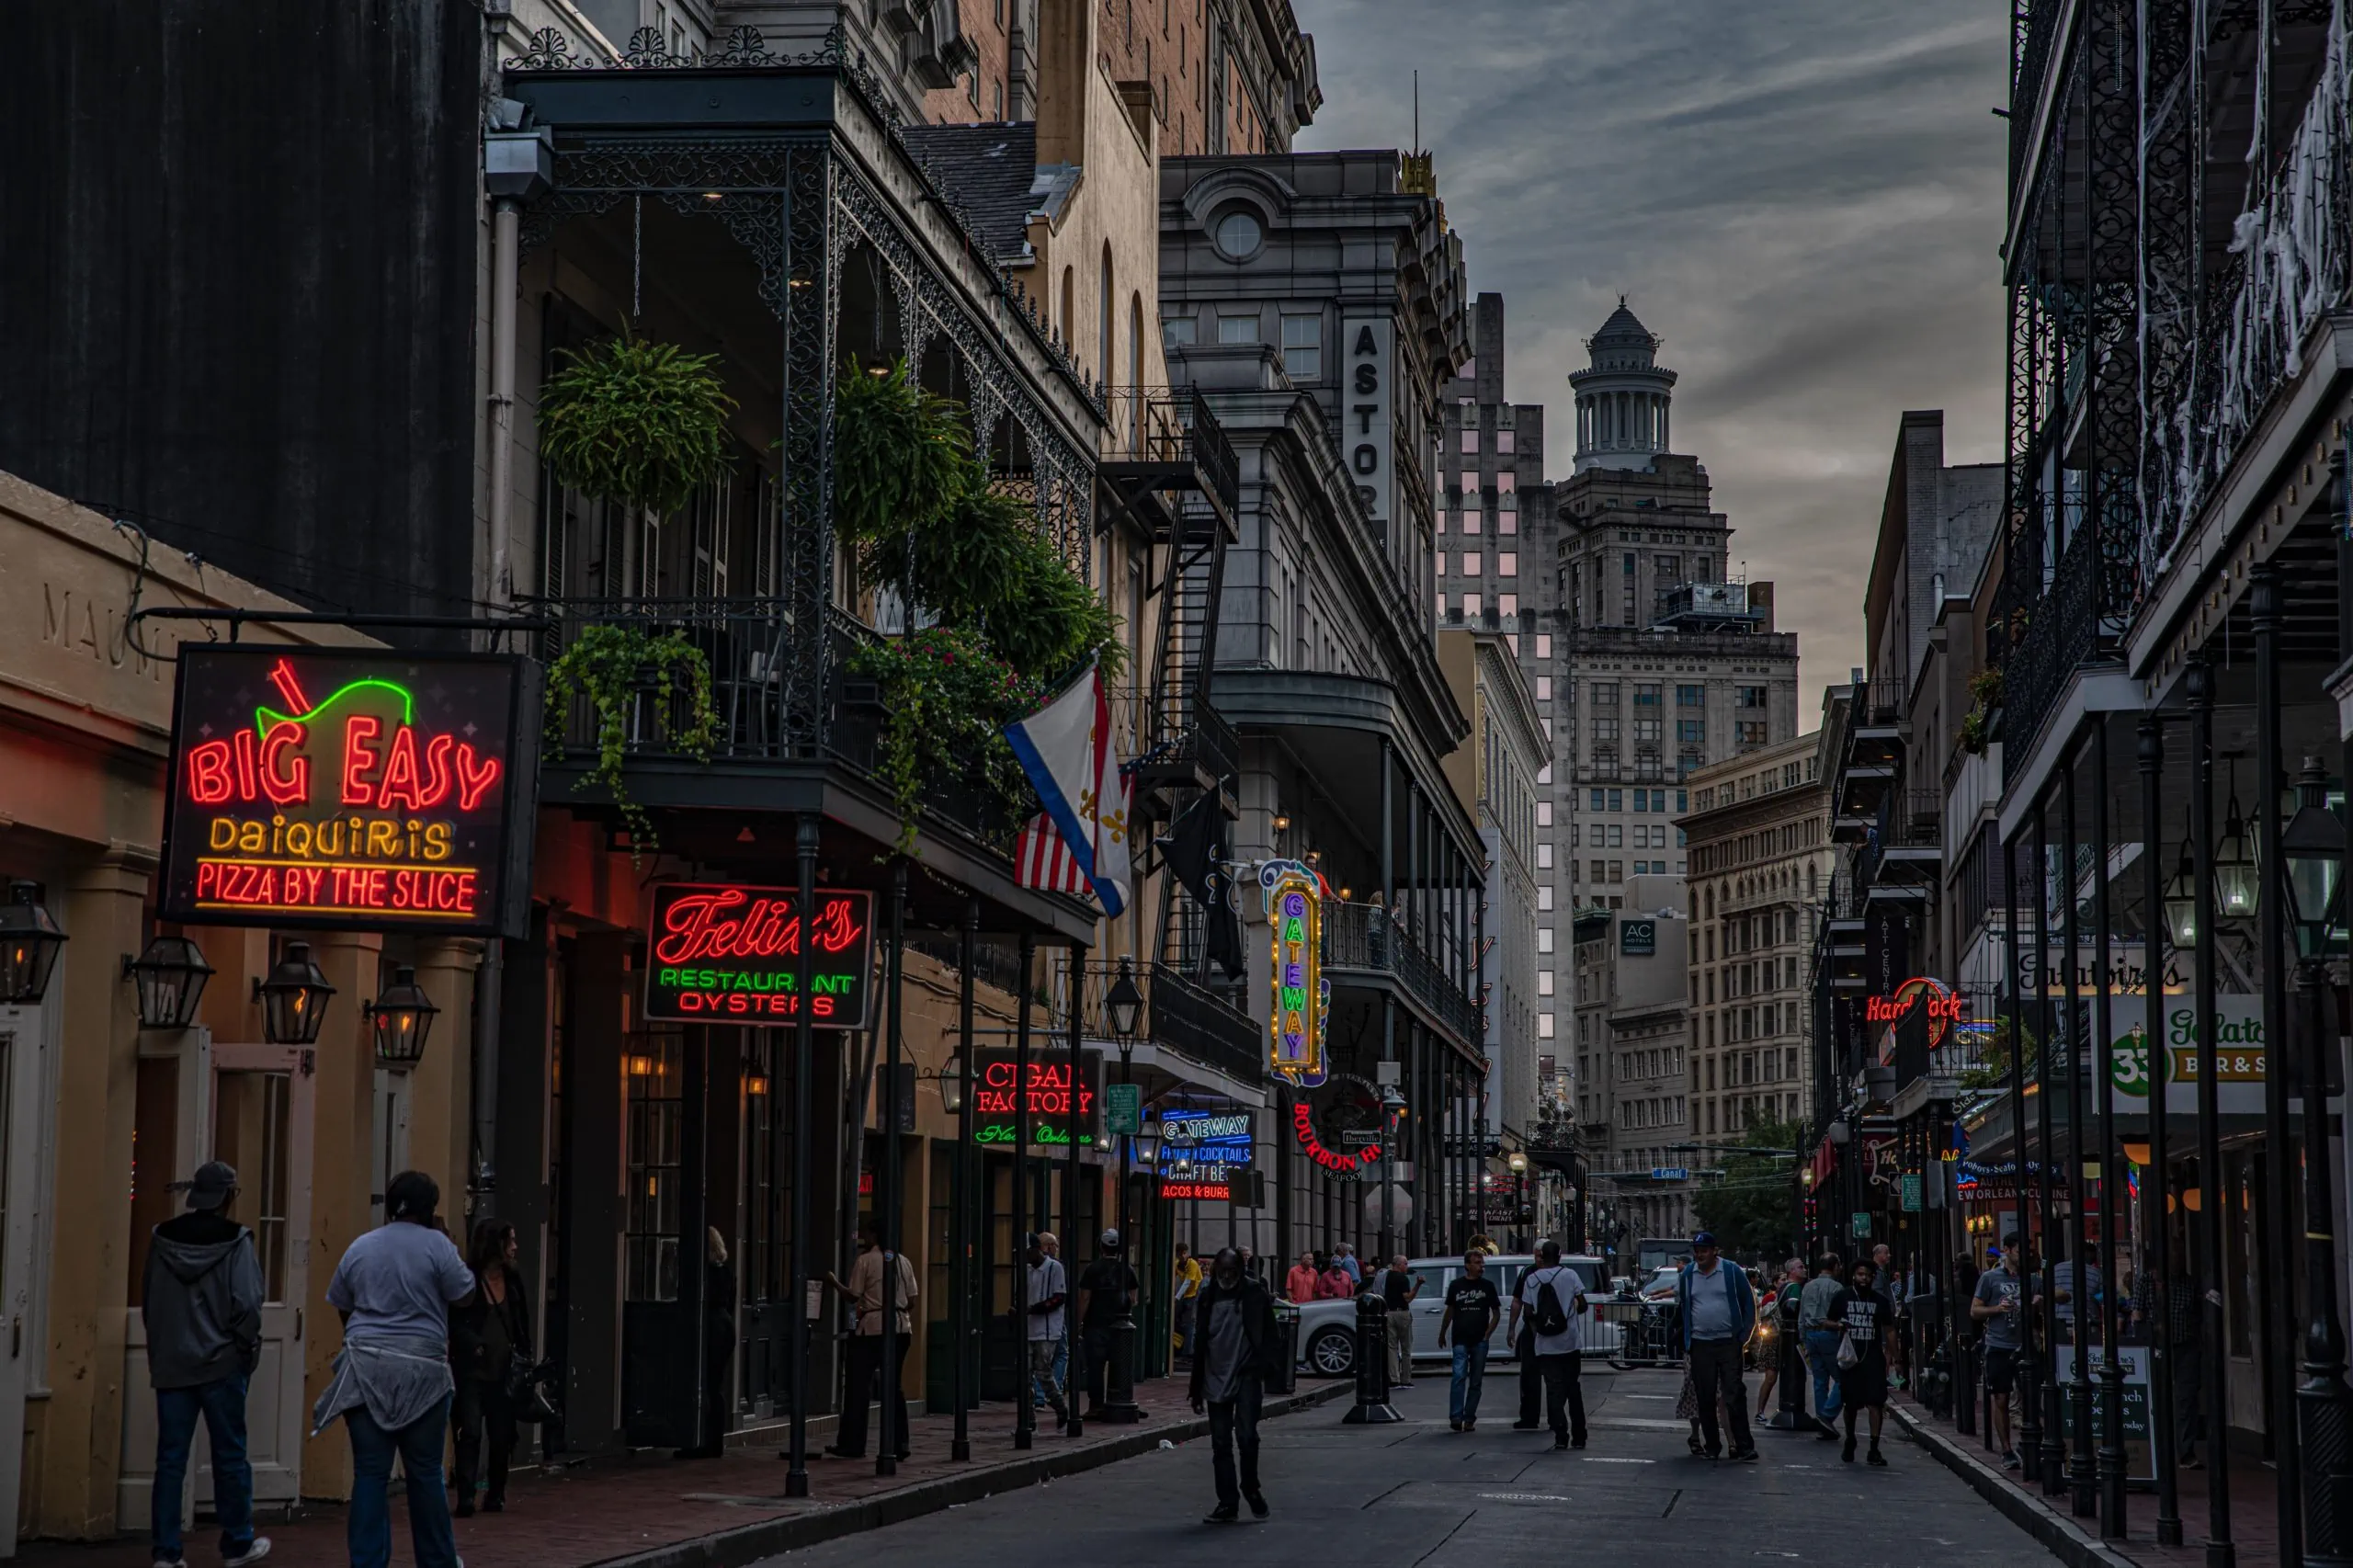 New Orleans’ Bourbon street with businesses protected by security cameras